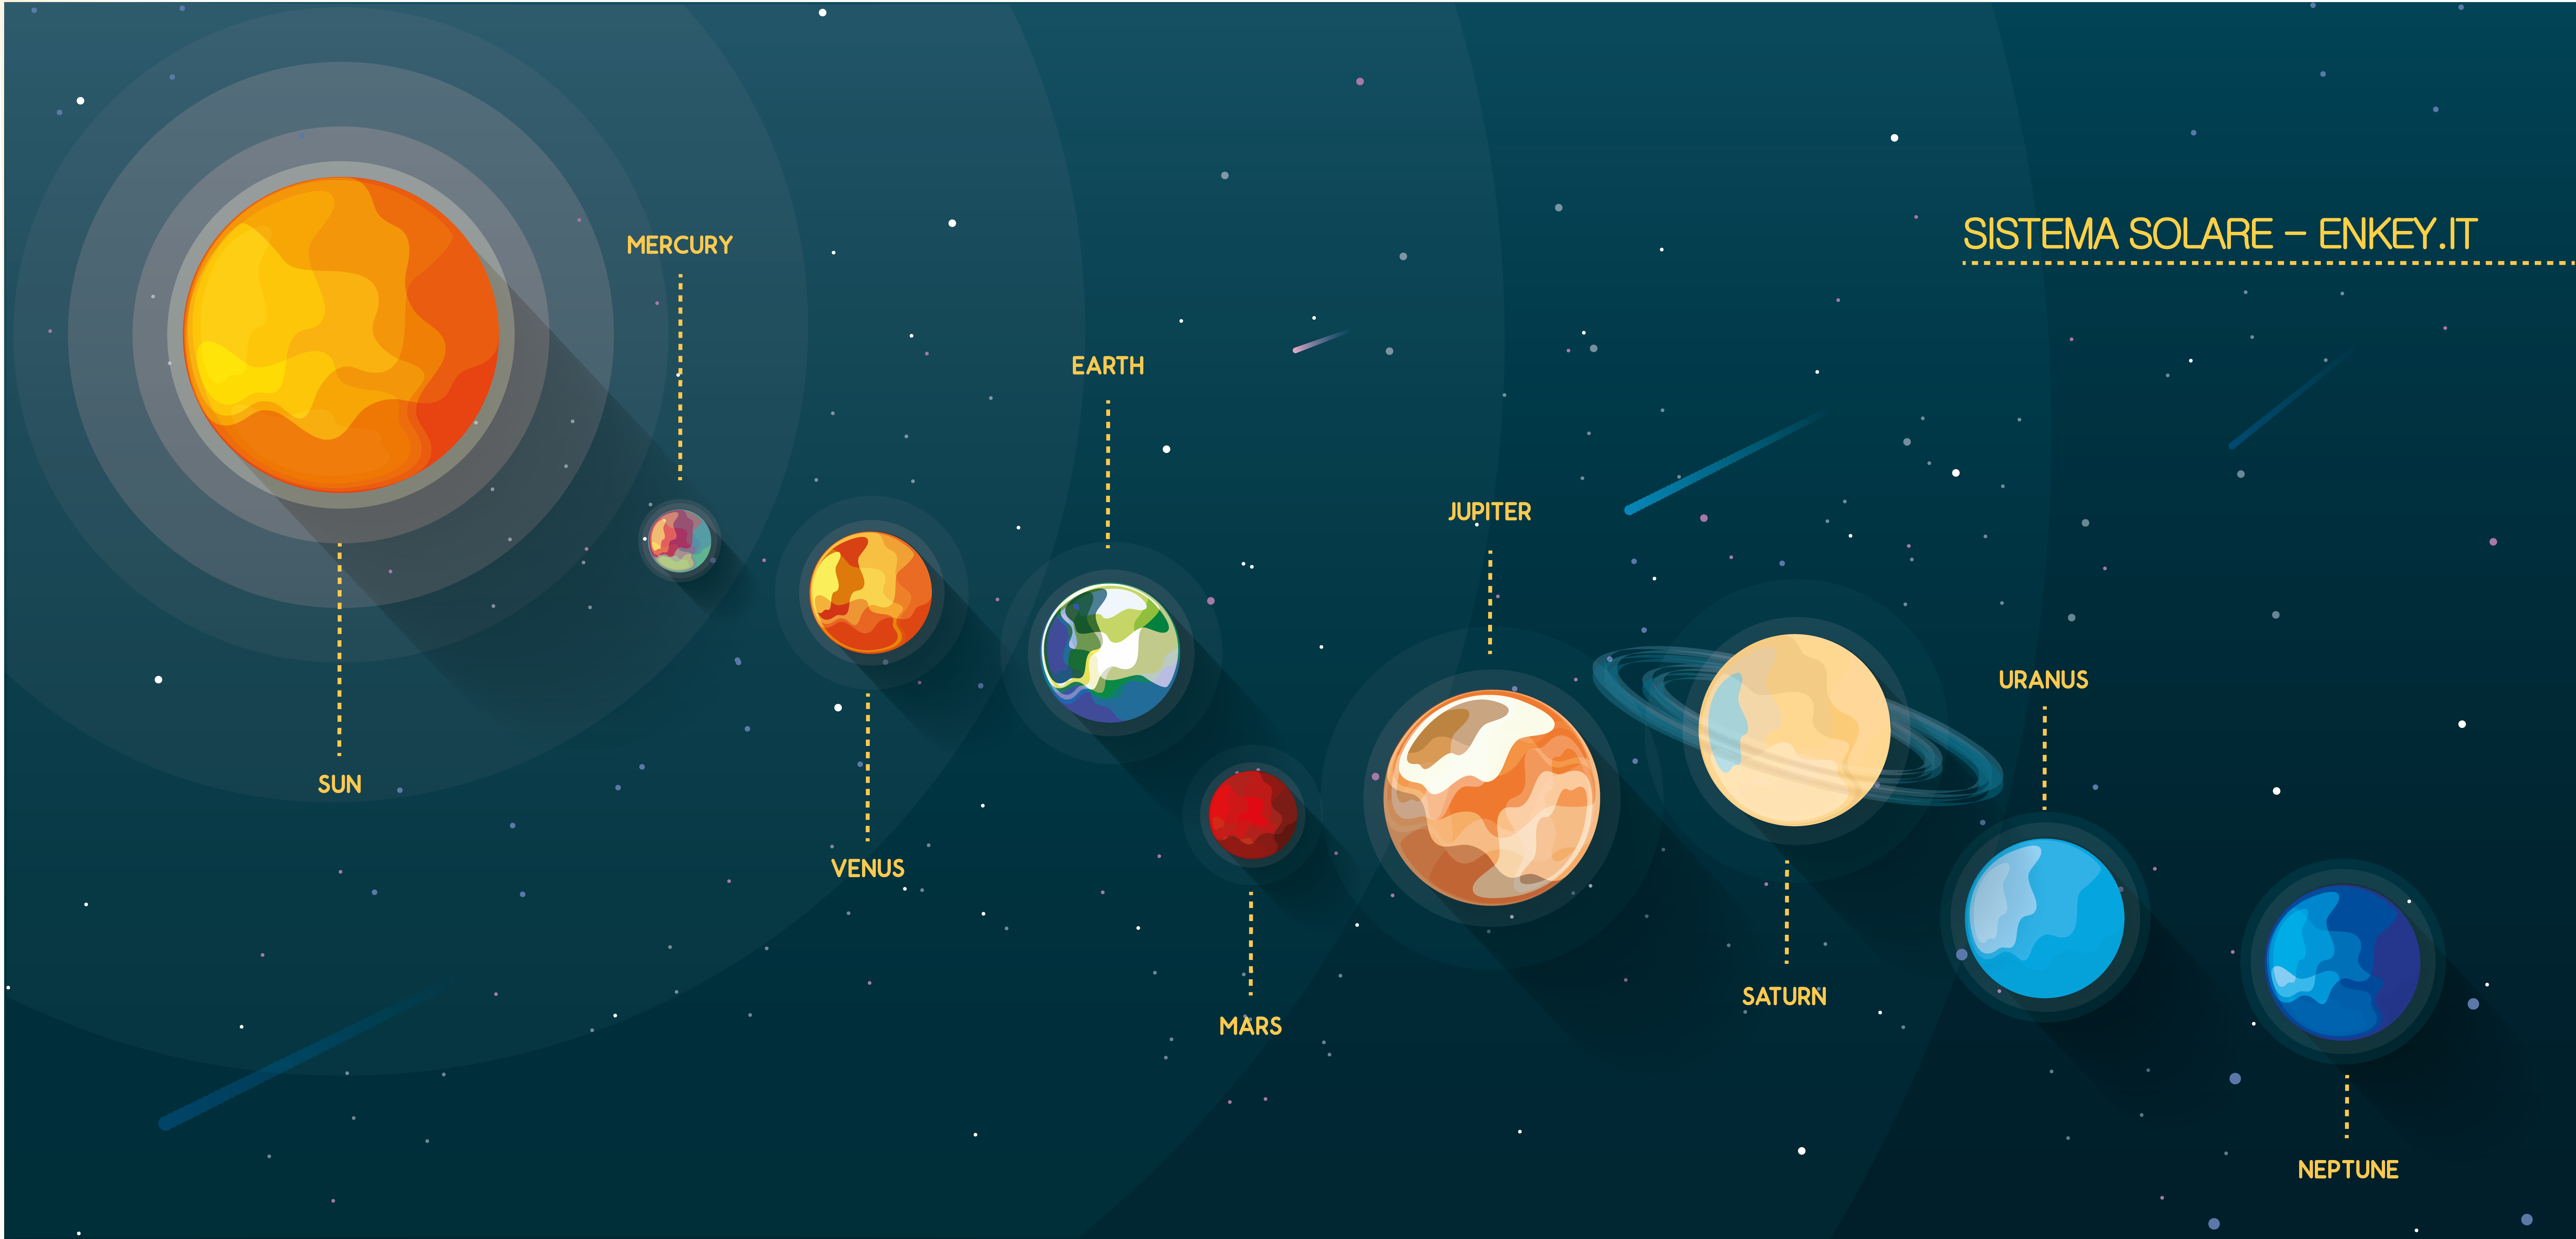 The planets of the Solar System